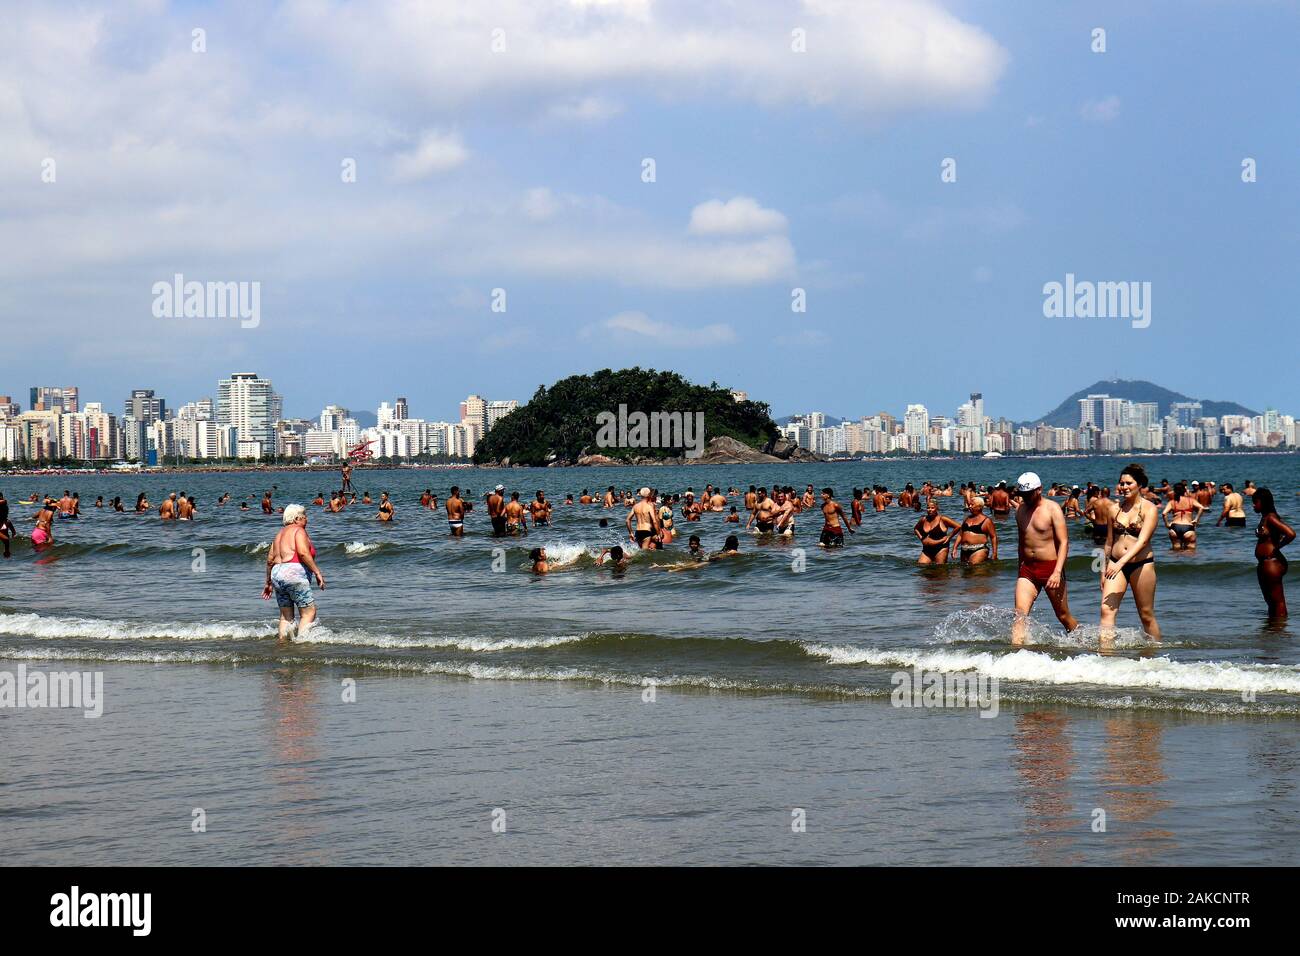 Brazilians celebrated the first day of the year with a sea bath at Itararé beach. Stock Photo